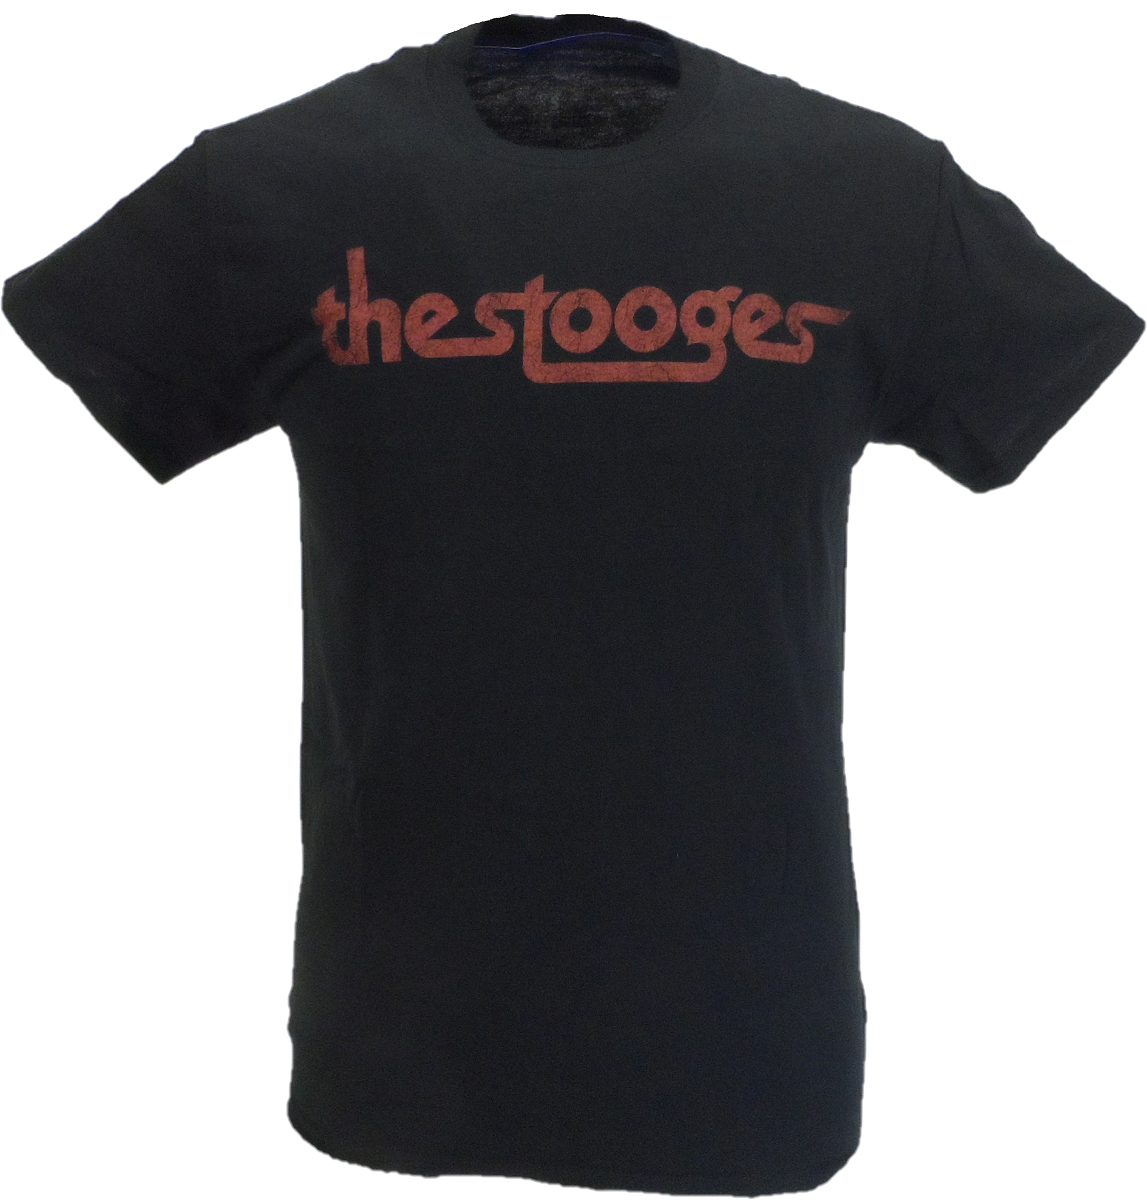 Mens Black Official Iggy and the Stooges Vintage Logo T Shirt